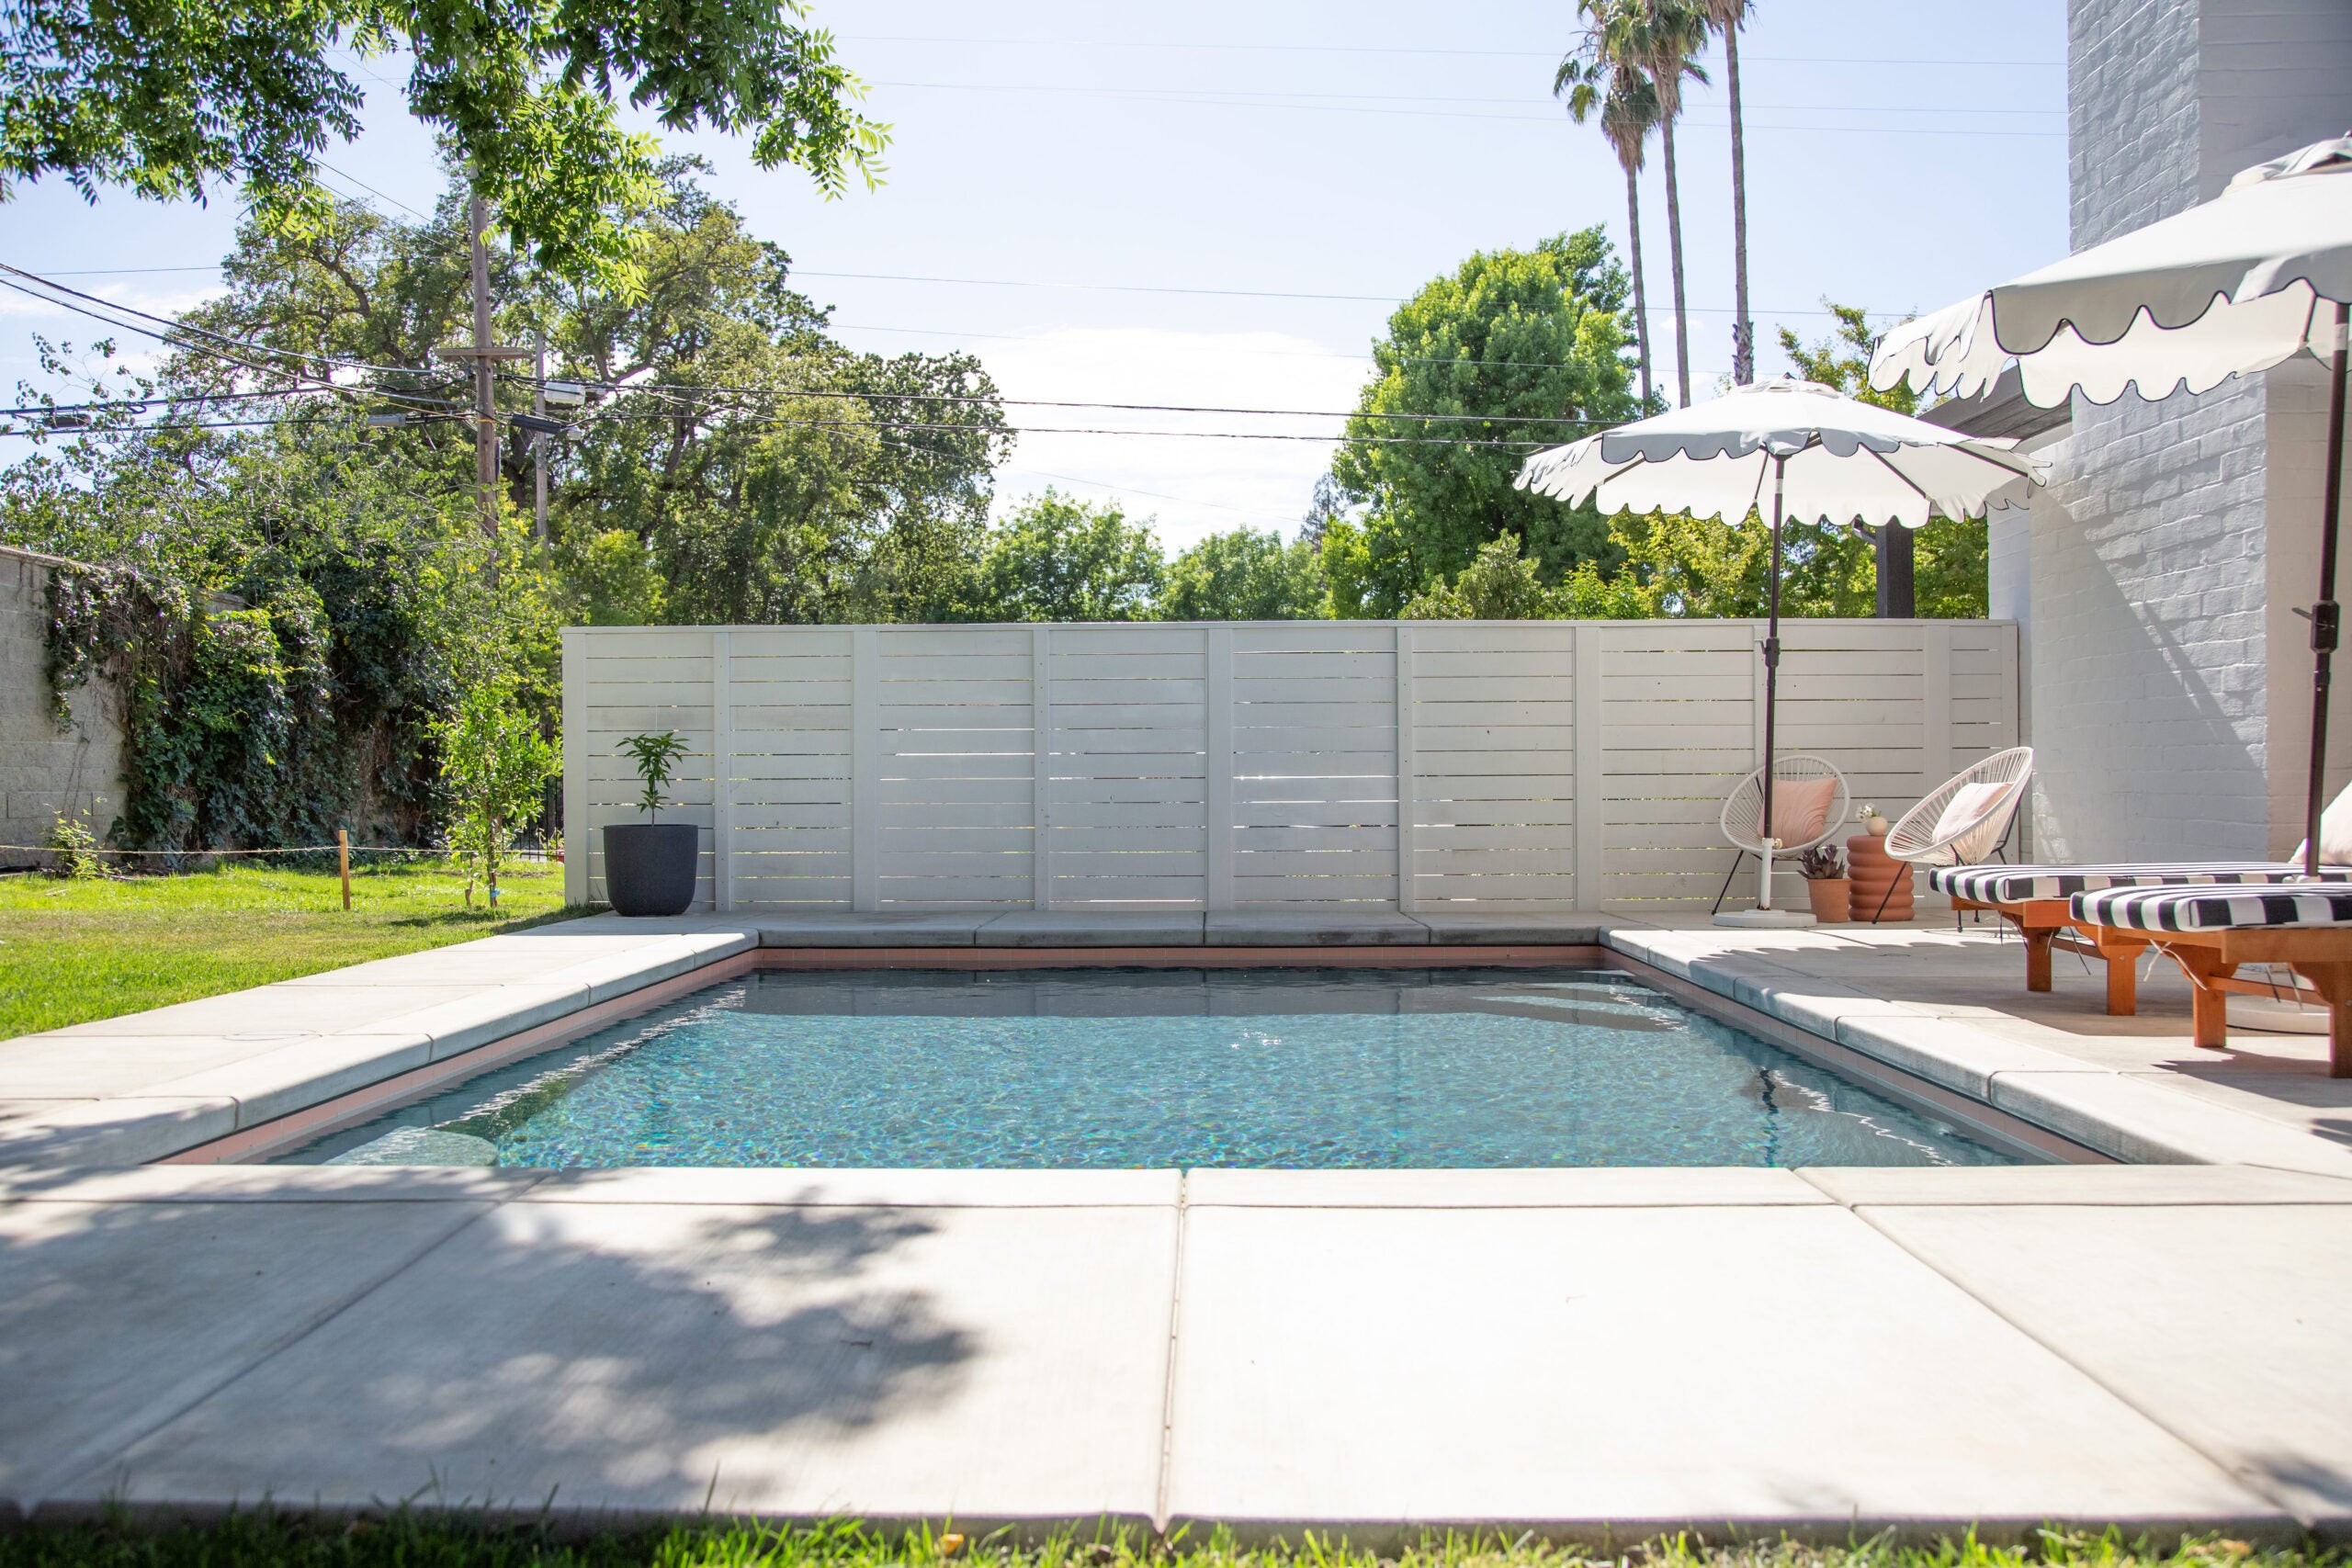 privacy fence around pool